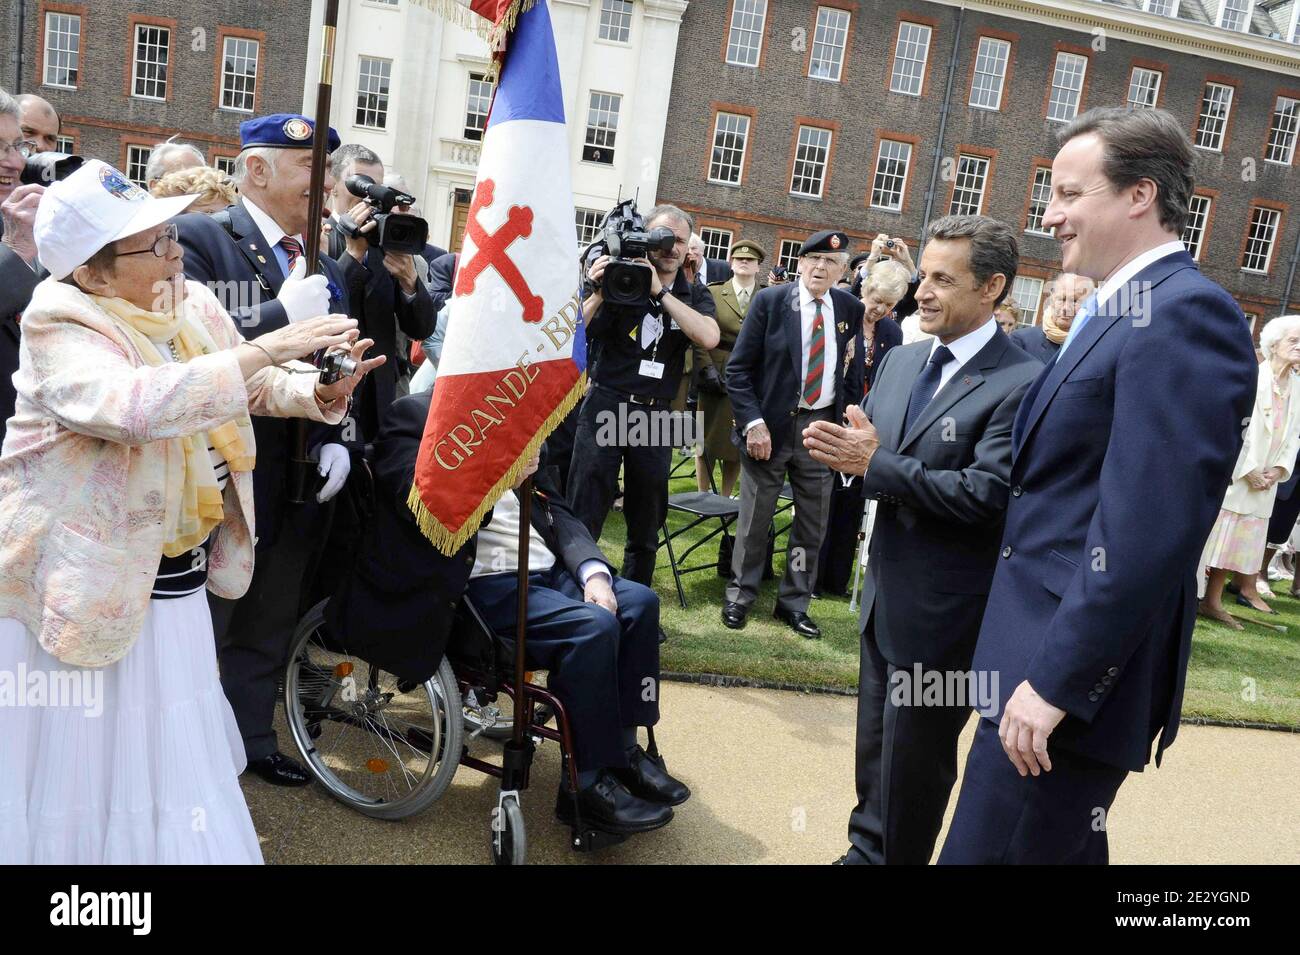 British Prime Minister David Cameron and French President Nicolas Sarkozy talk with Legion de Honeur recipients and World War II veterans during a parade at the Royal Chelsea Hospital in London, UK on June 18, 2010. Nicolas Sarkozy and World War II veterans visited London to mark the 70th anniversary of Charles de Gaulle's rousing radio appeal to his compatriots to resist the Nazi occupation. On June 18, 1940, four days after the fall of Paris and as the French government prepared to sign an armistice with Germany, the exiled military leader issued an impassioned appeal over the BBC airwaves t Stock Photo